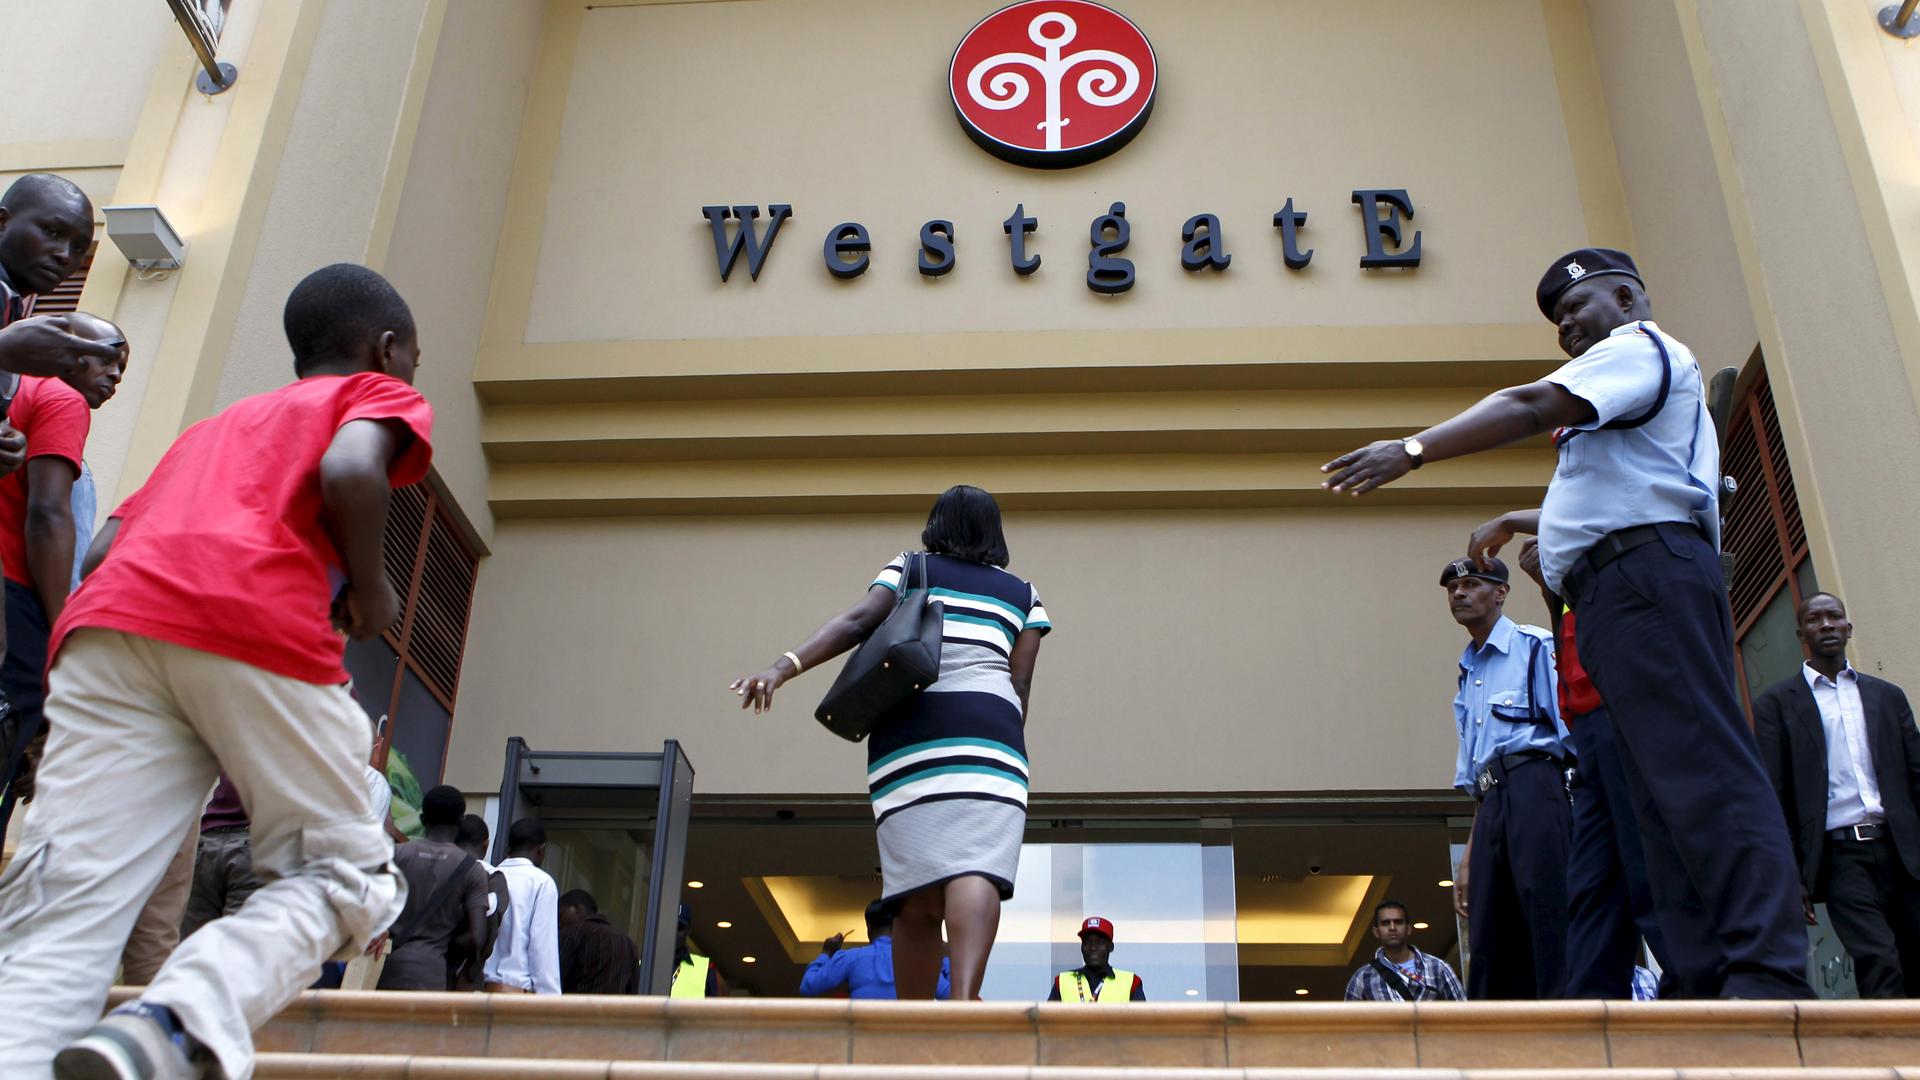 Customers enter the re-opened Westgate shopping mall, in Kenya's capital Nairobi, July 18, 2015. Kenya's Westgate shopping mall reopened for the first time since al Shabaab gunmen stormed the mall killing at least 67 people in September 2013.